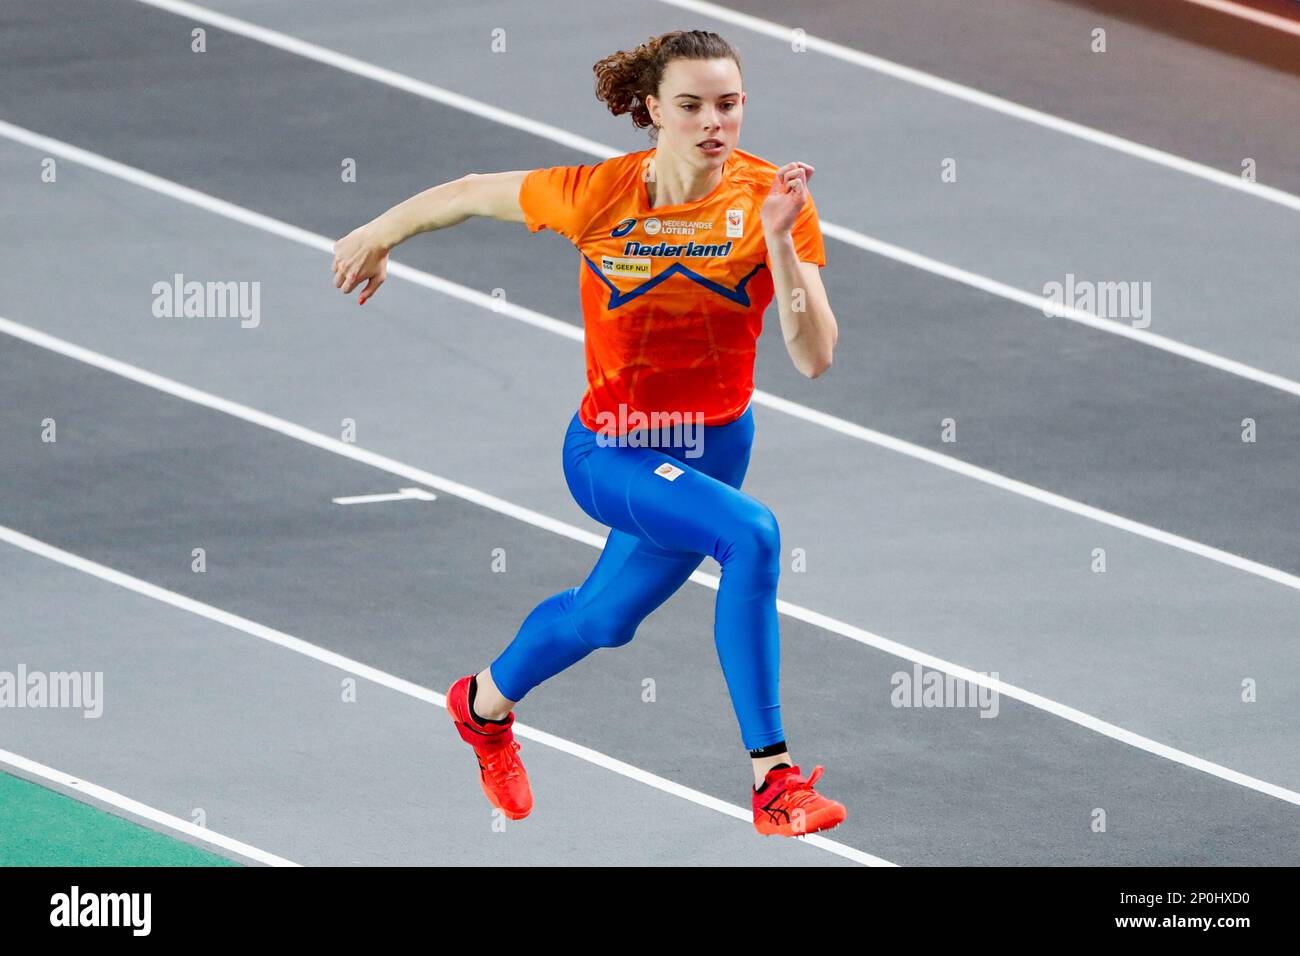 Istanbul, Turkey. 03rd Mar, 2023. ISTANBUL, TURKEY - MARCH 3: Sofie Dokter of the Netherlands competing in the Men's 400m during 1 of European Athletics Championships at the Atakoy